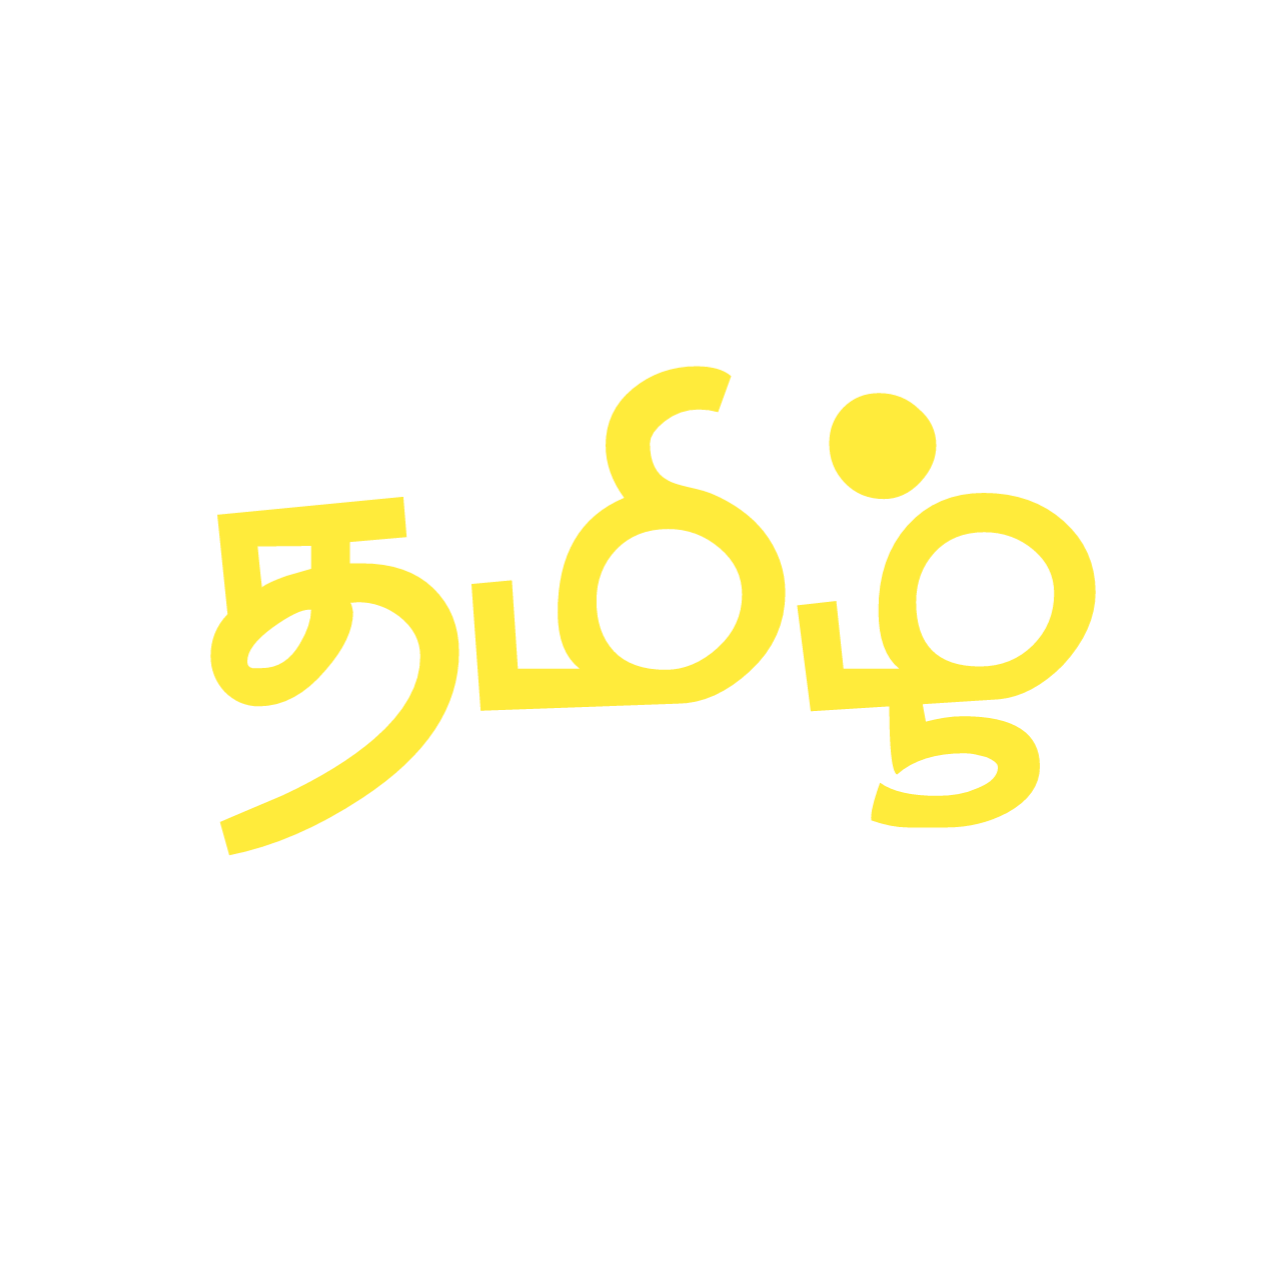 Download Free 3413+ Tamil Stylish Font Ttf Zip File Yellowimages Mockups free packaging mockups from the trusted websites.